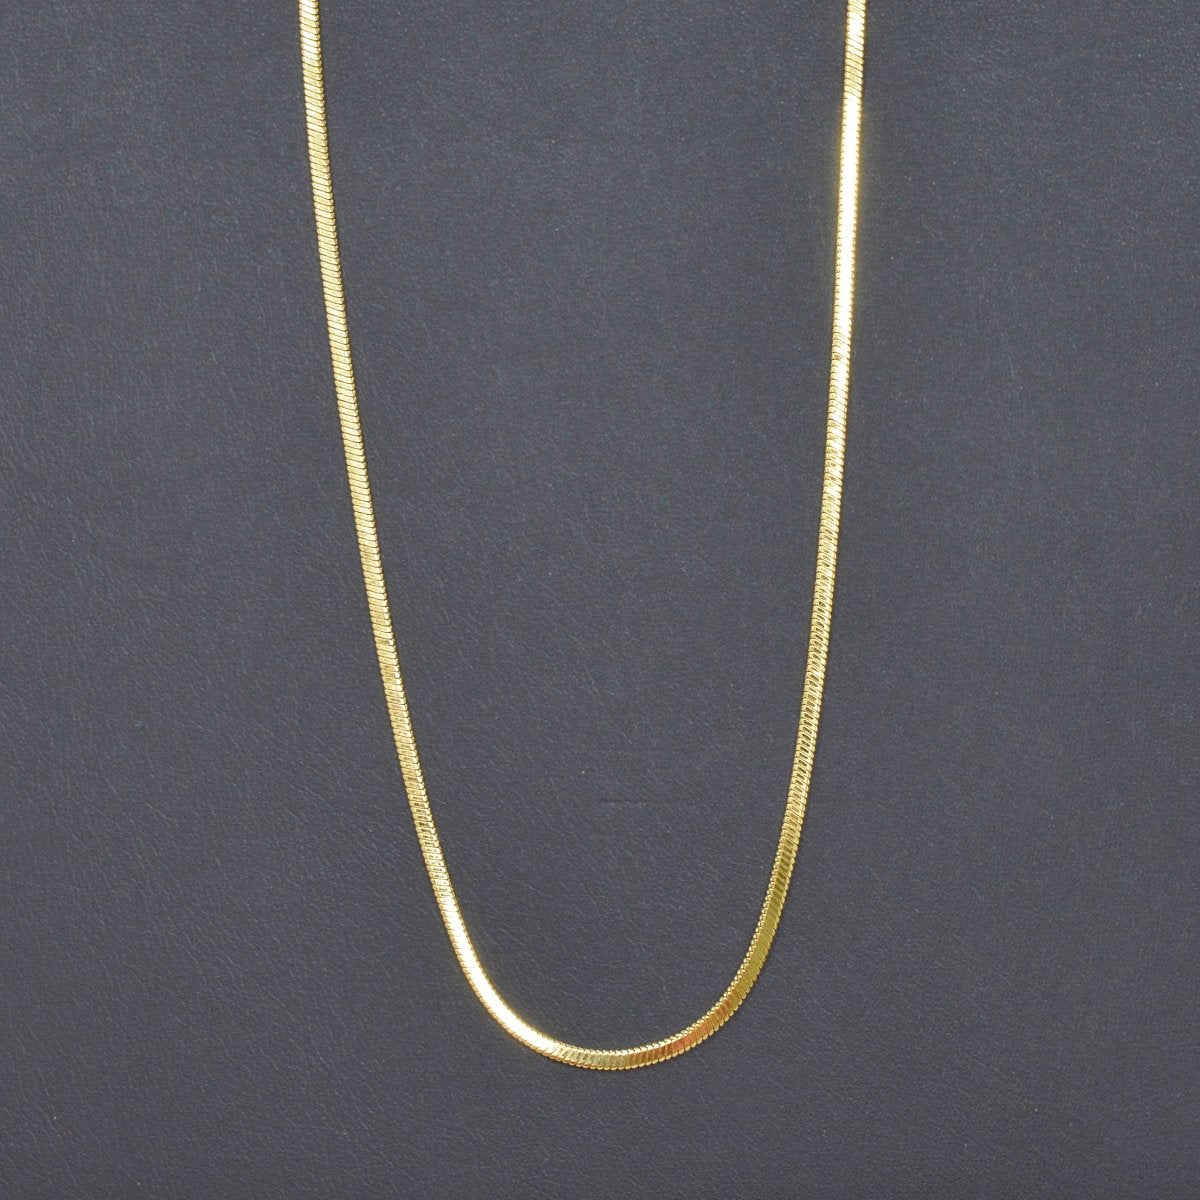 23.6 inch Omega Chain Necklace, 24K Gold Plated Omega Finished Necklace For Jewelry Making, Dainty 1.8mm Omega Necklace w/ Lobster Clasps | CN-998 Clearance Pricing - DLUXCA